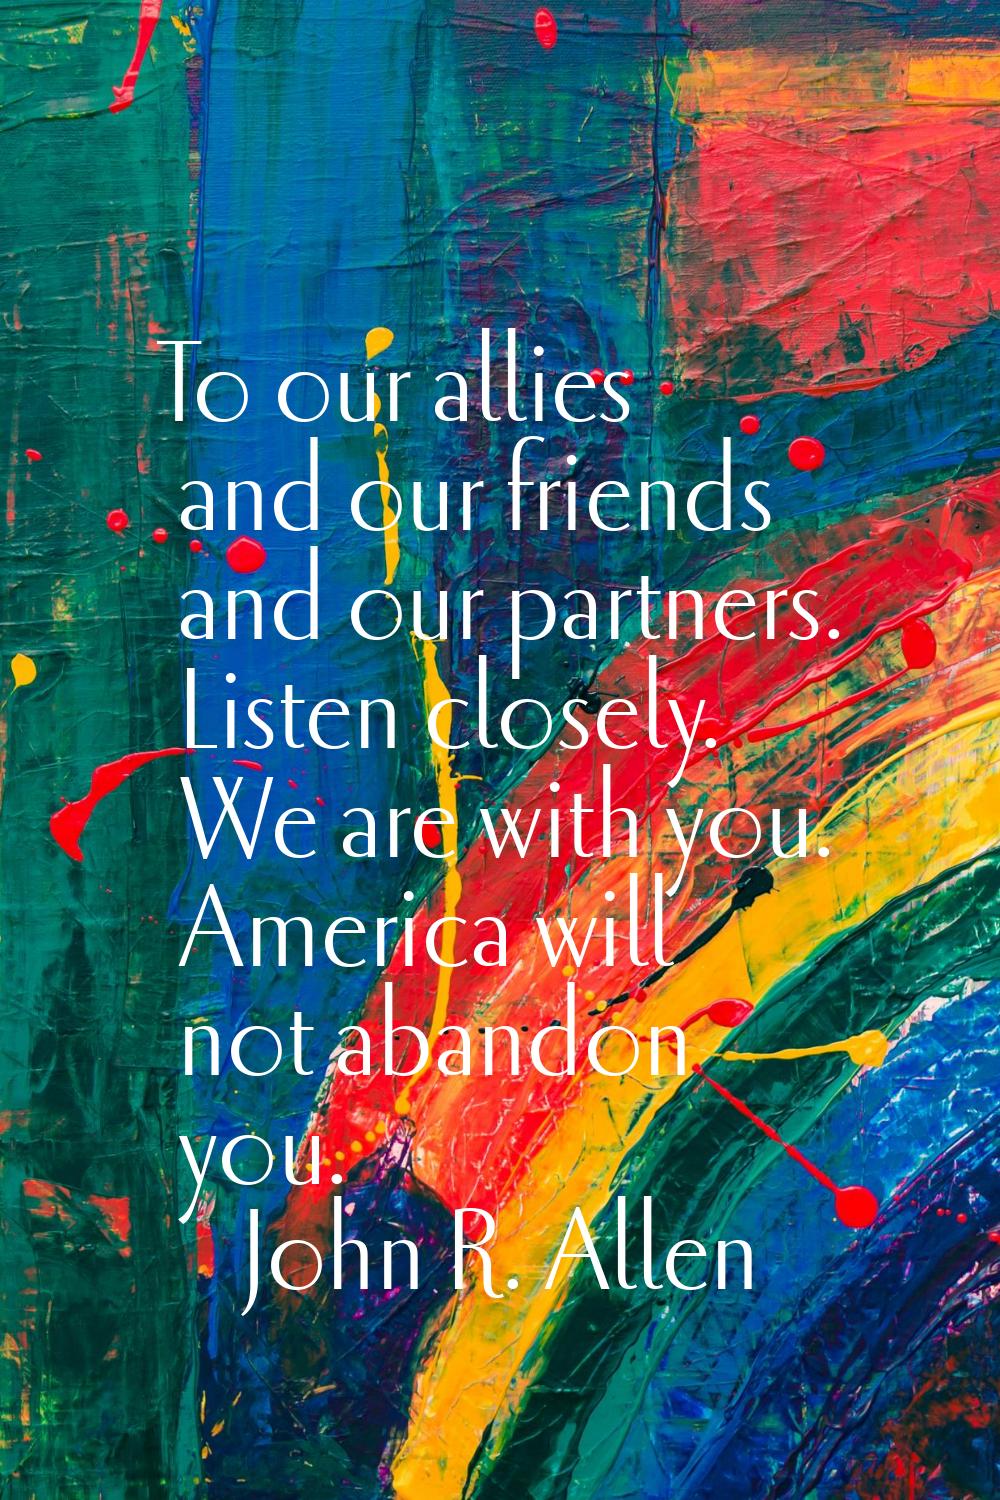 To our allies and our friends and our partners. Listen closely. We are with you. America will not a